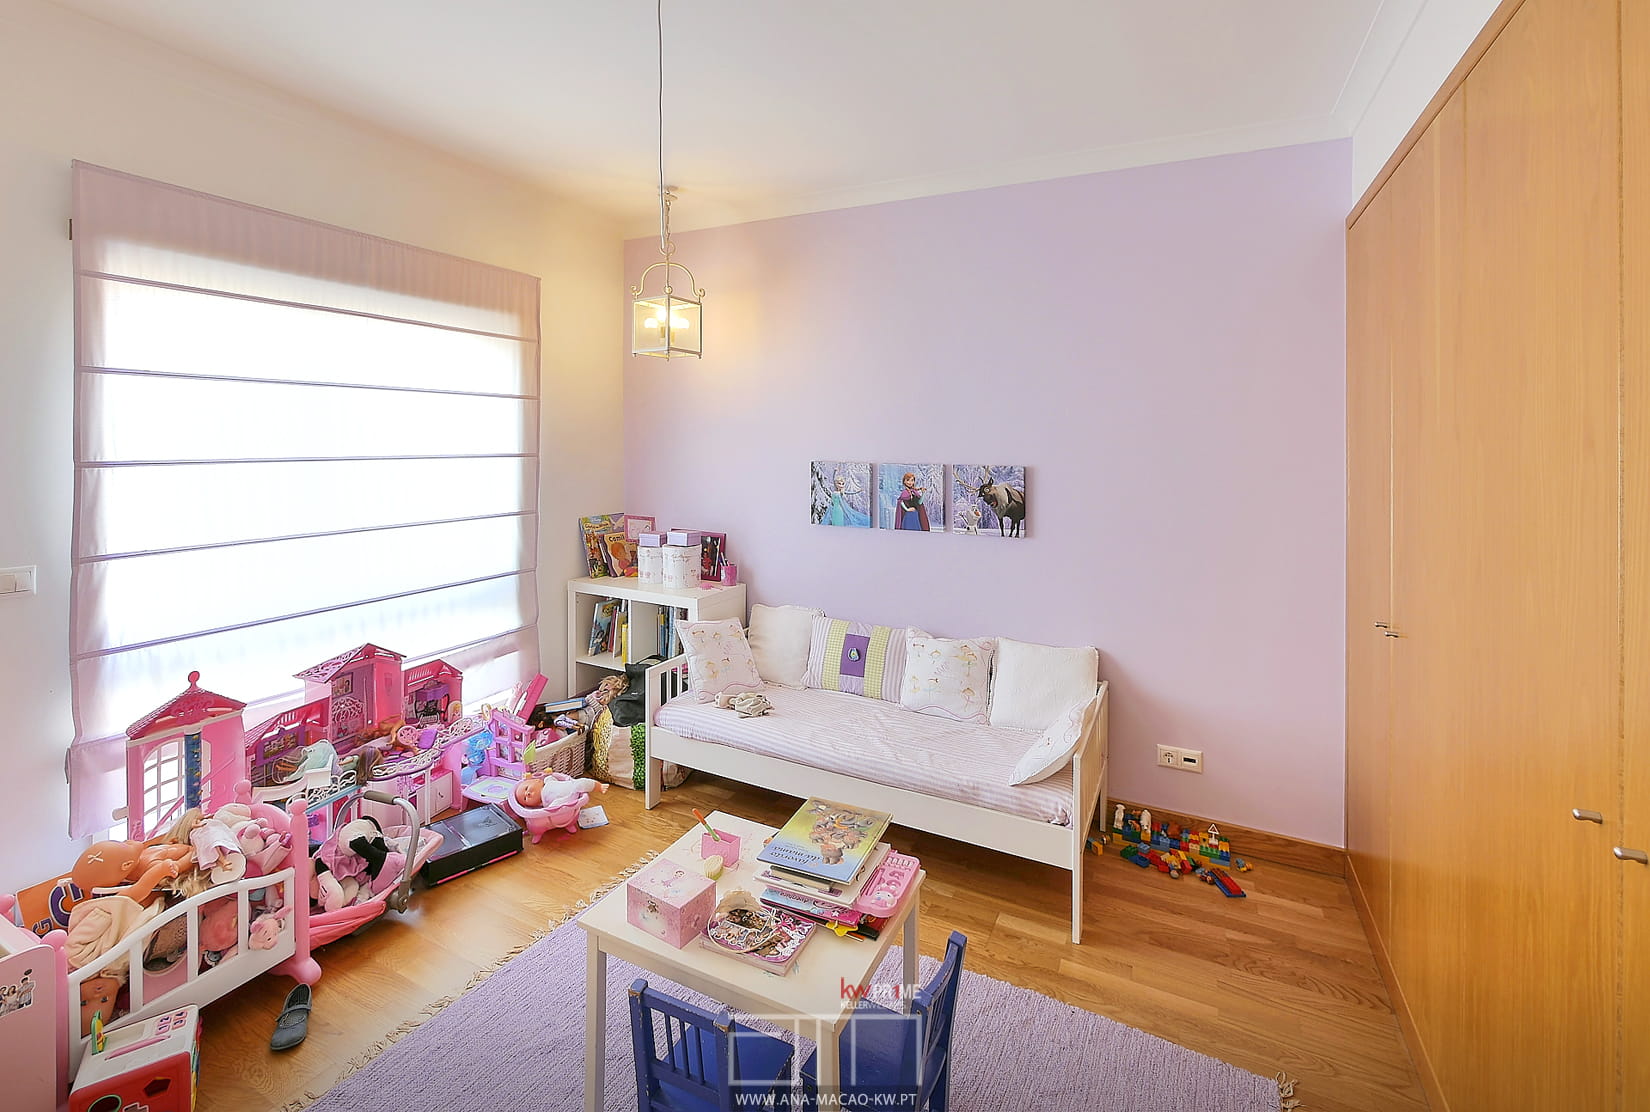 Room with children's decoration